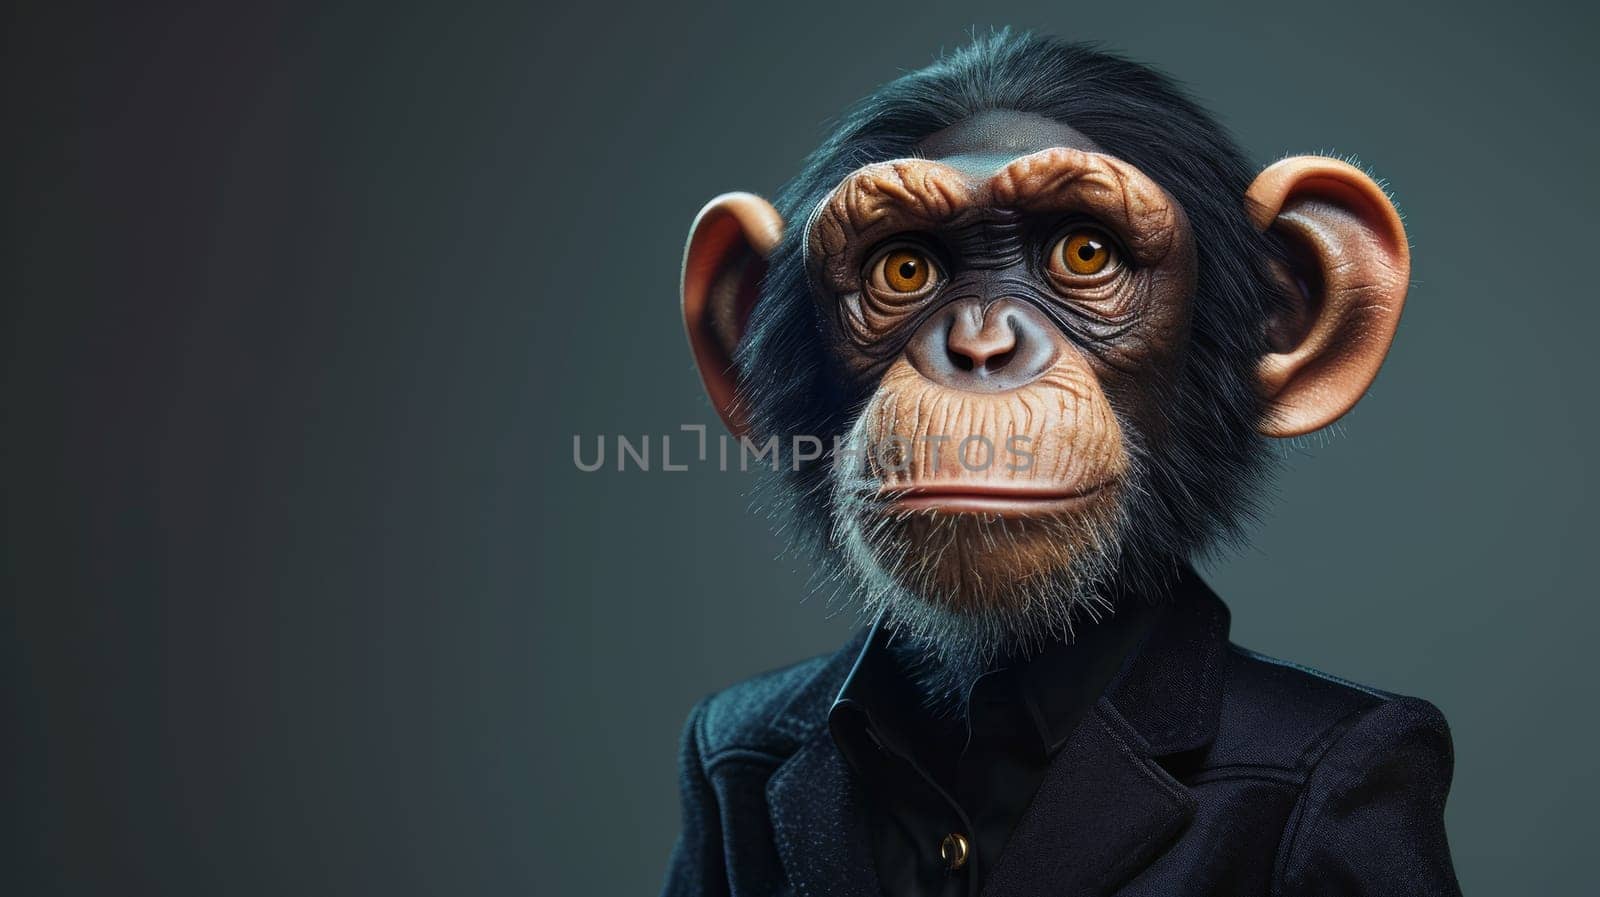 A chimpanzee wearing a black suit and tie with glasses, AI by starush